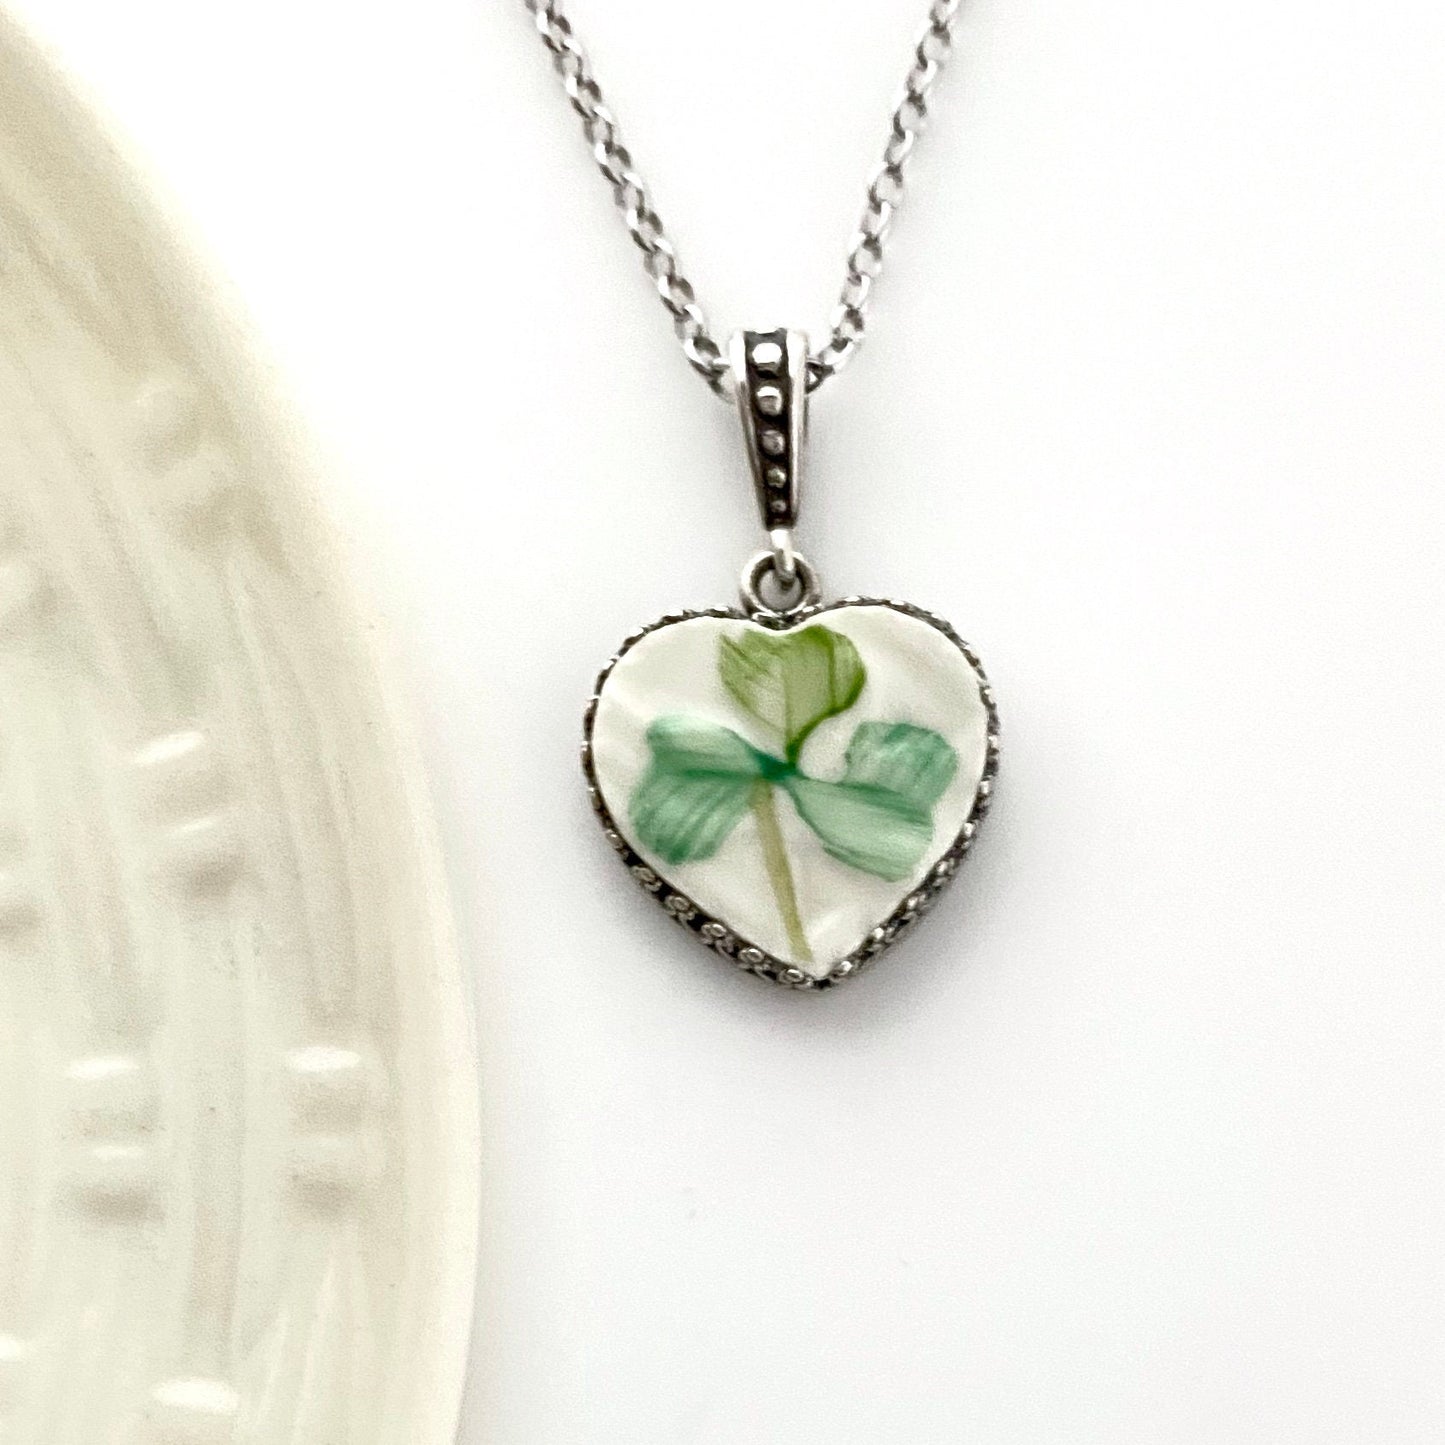 Vintage Belleek Irish China Necklace, Unique Gifts for Women, Celtic Necklace, Broken China Jewelry, Heart Necklace, Gifts for Her